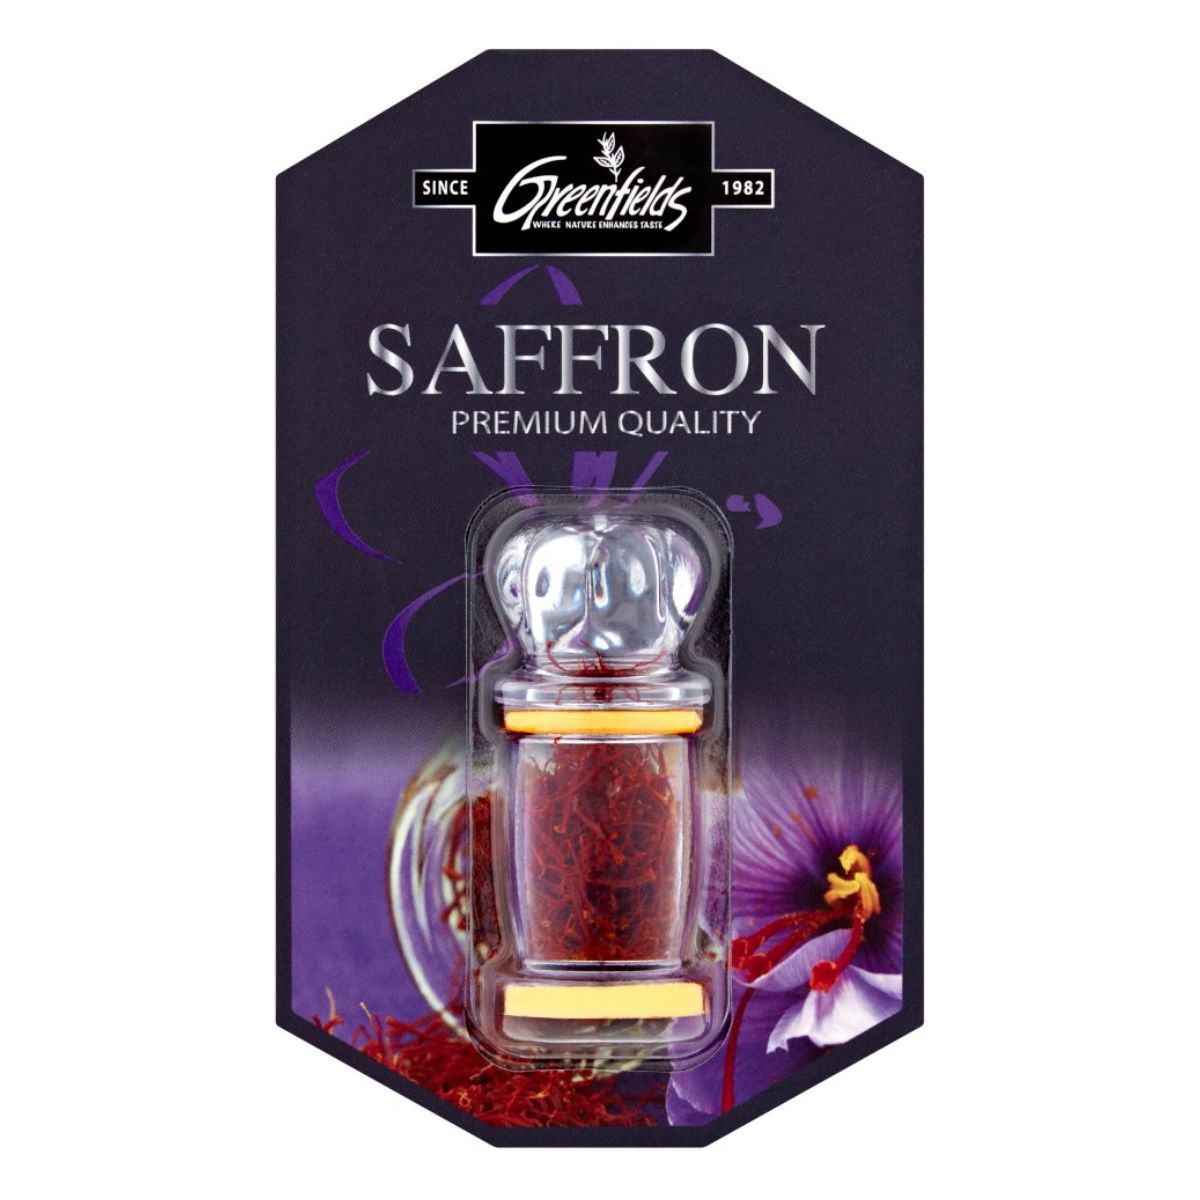 A Greenfields - Saffron - 0.6g in a package.